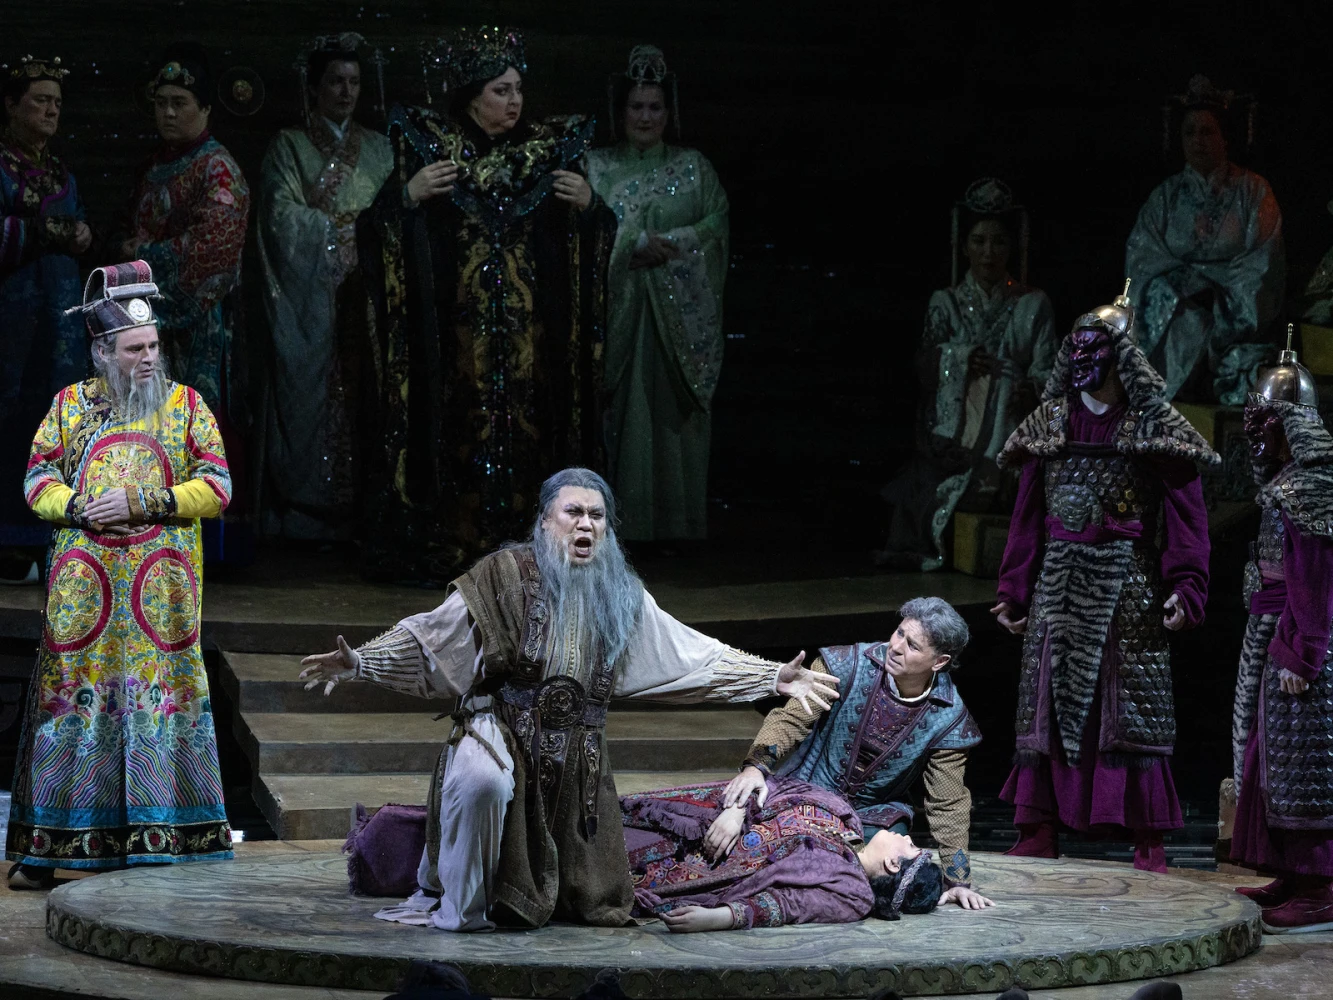 Puccini's Turandot: What to expect - 5